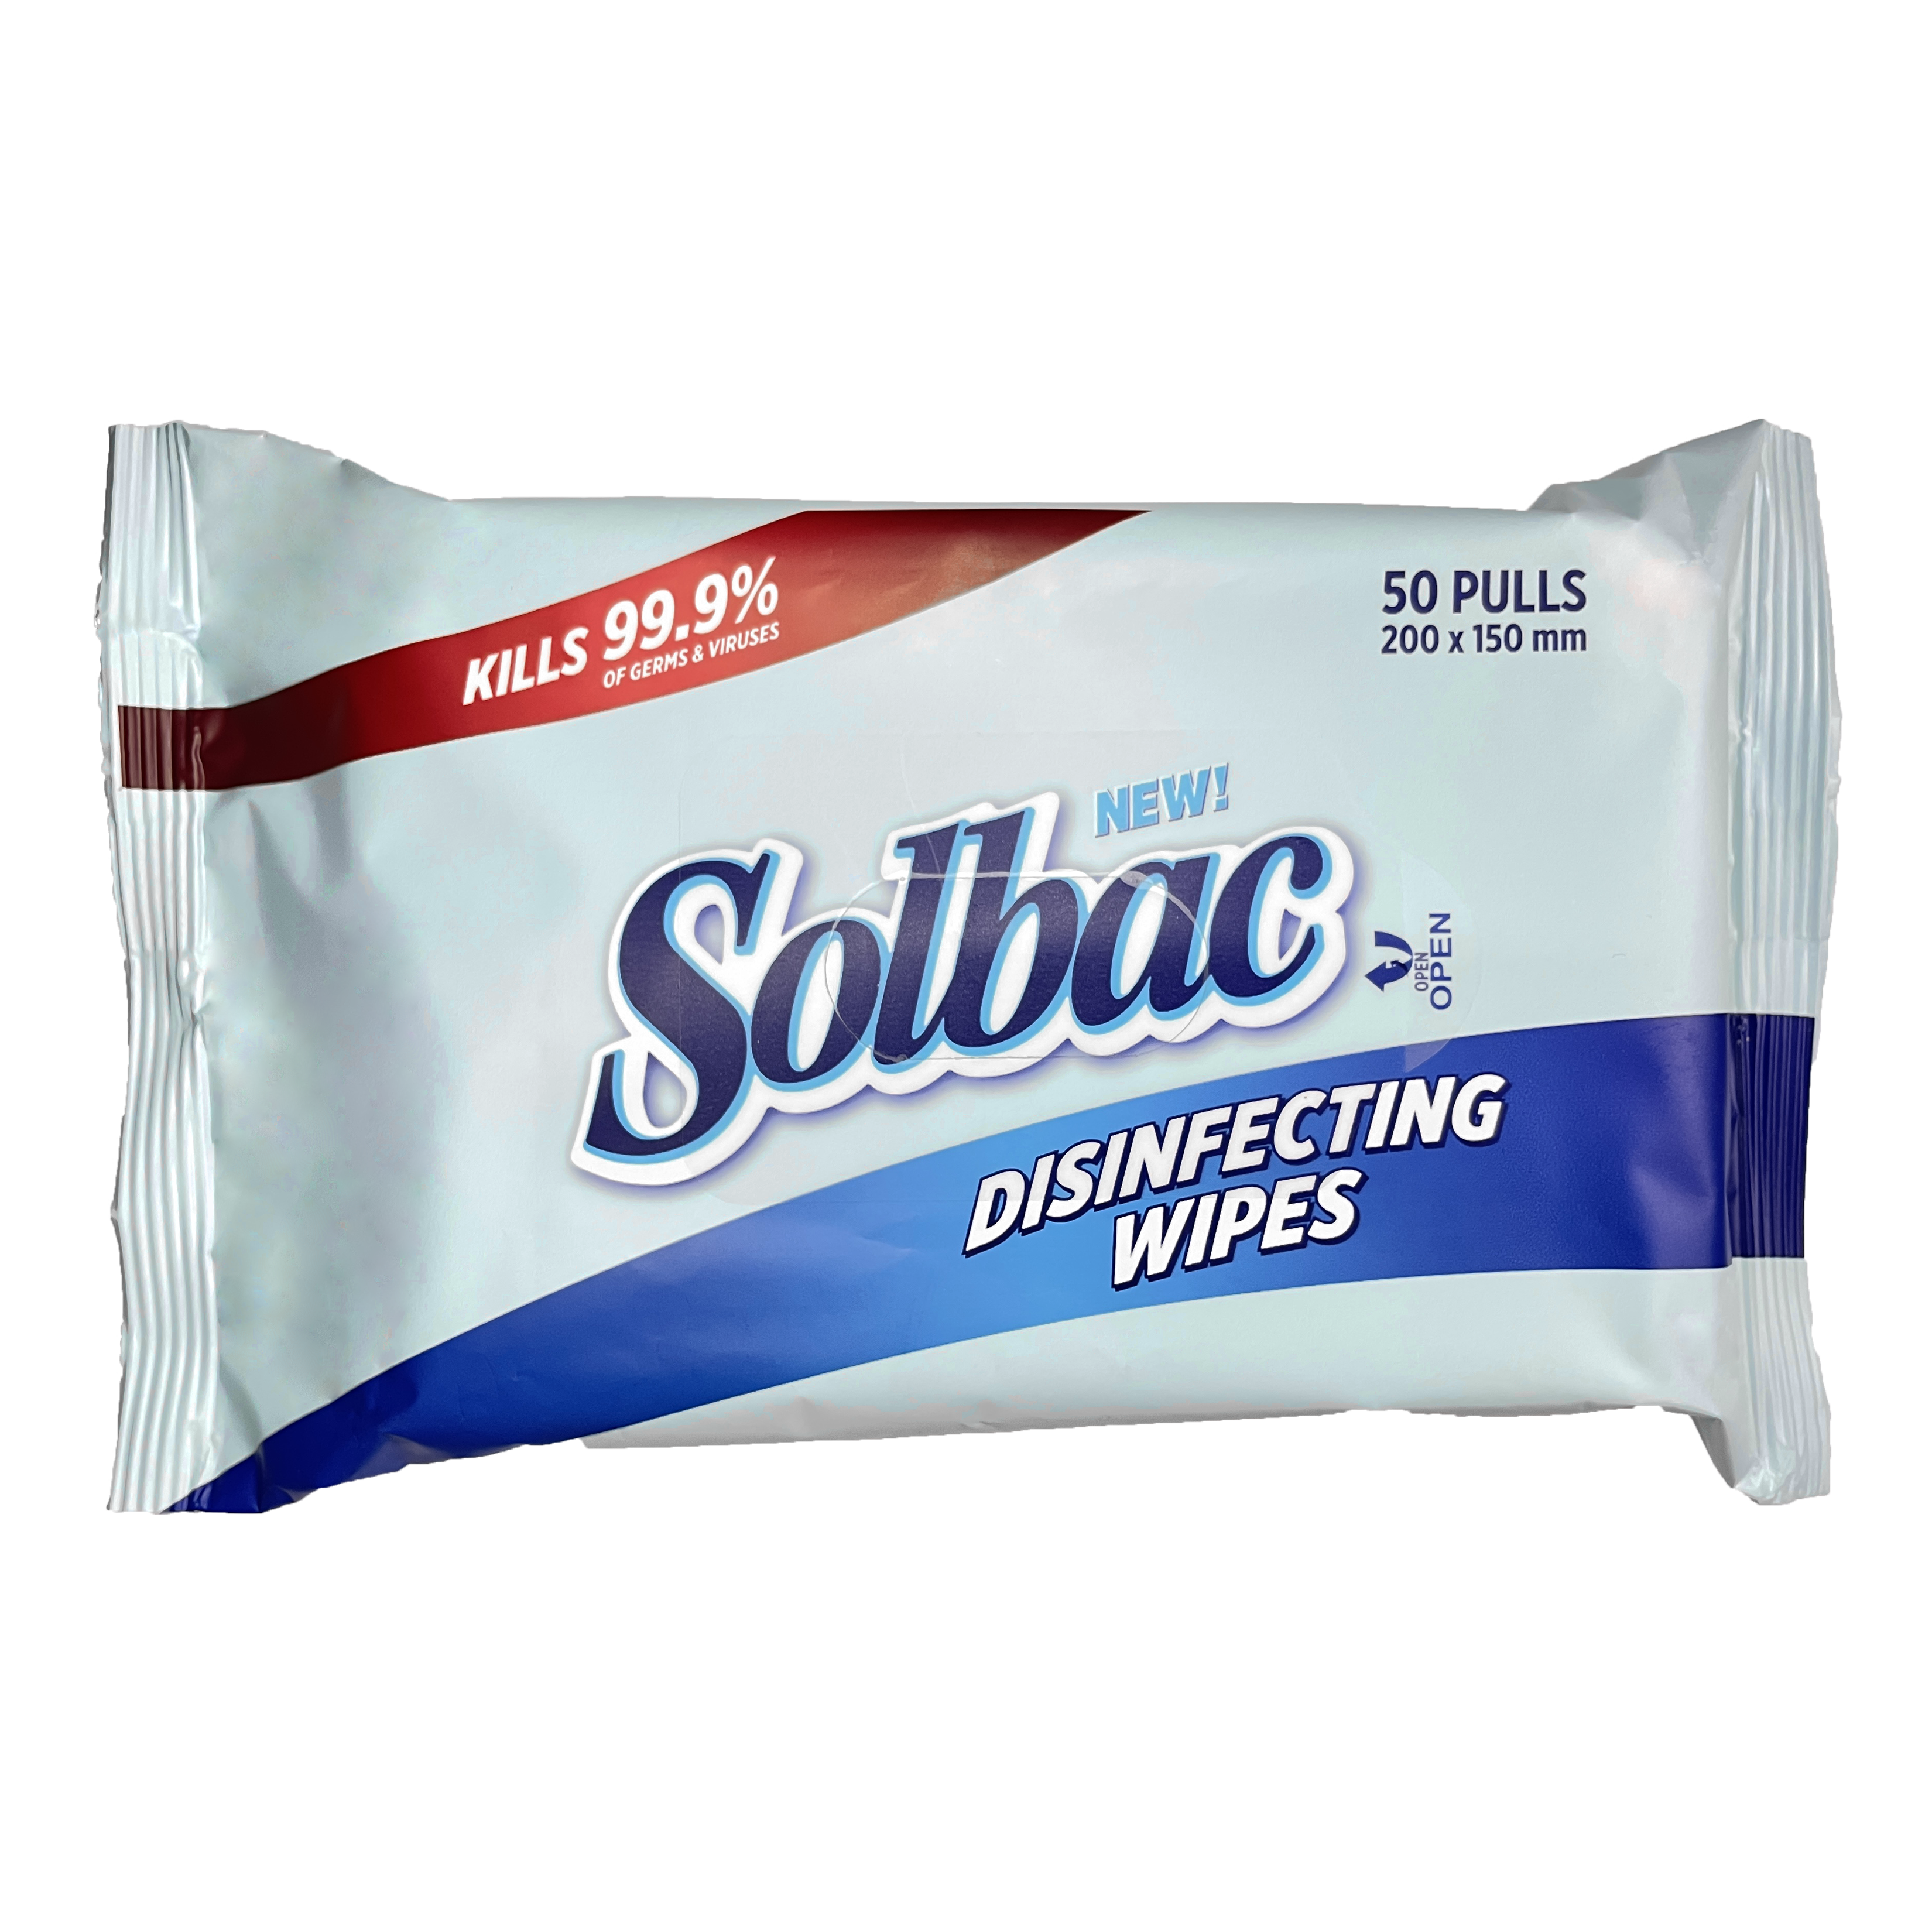 Solbac Disinfecting Wipes